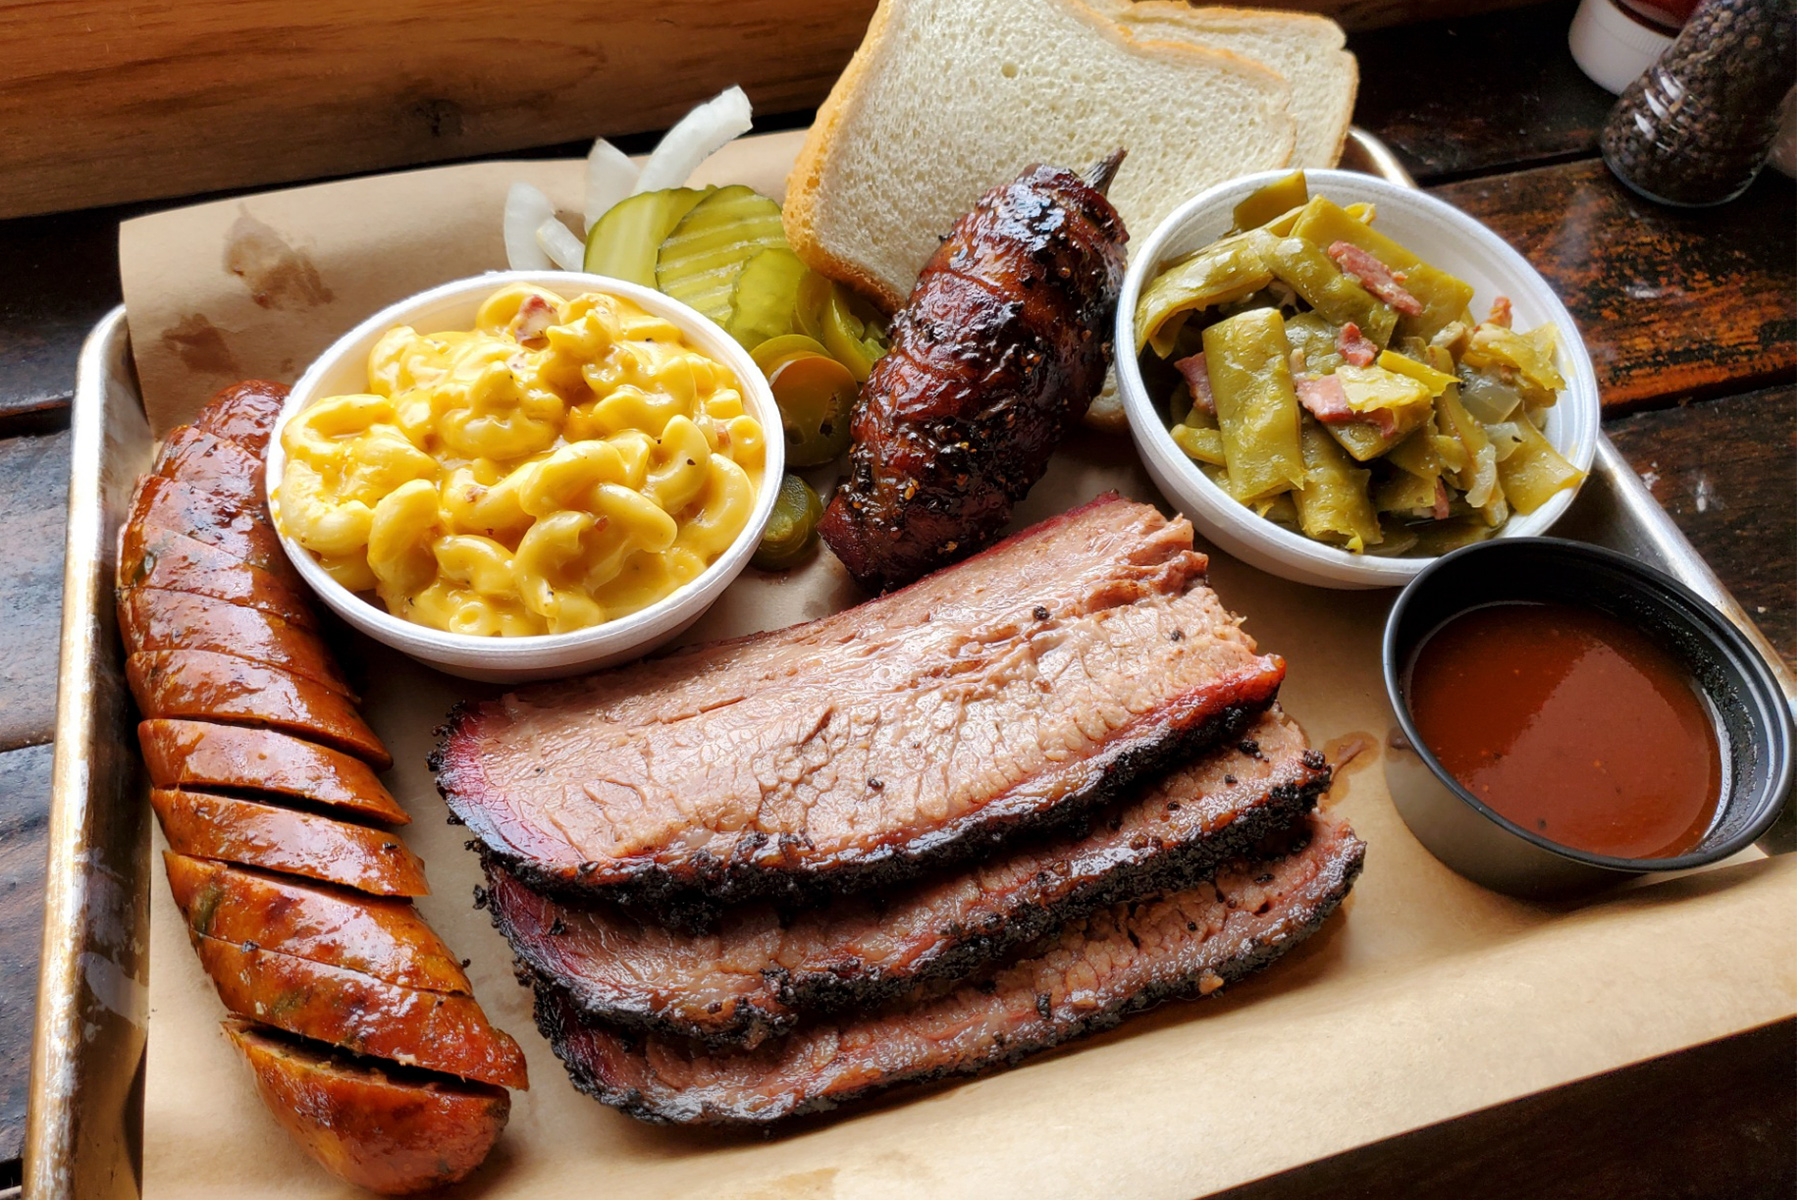 Picture of a barbecue tray from Hutchins BBQ, including a bacon-wrapped jalapeño pepper.